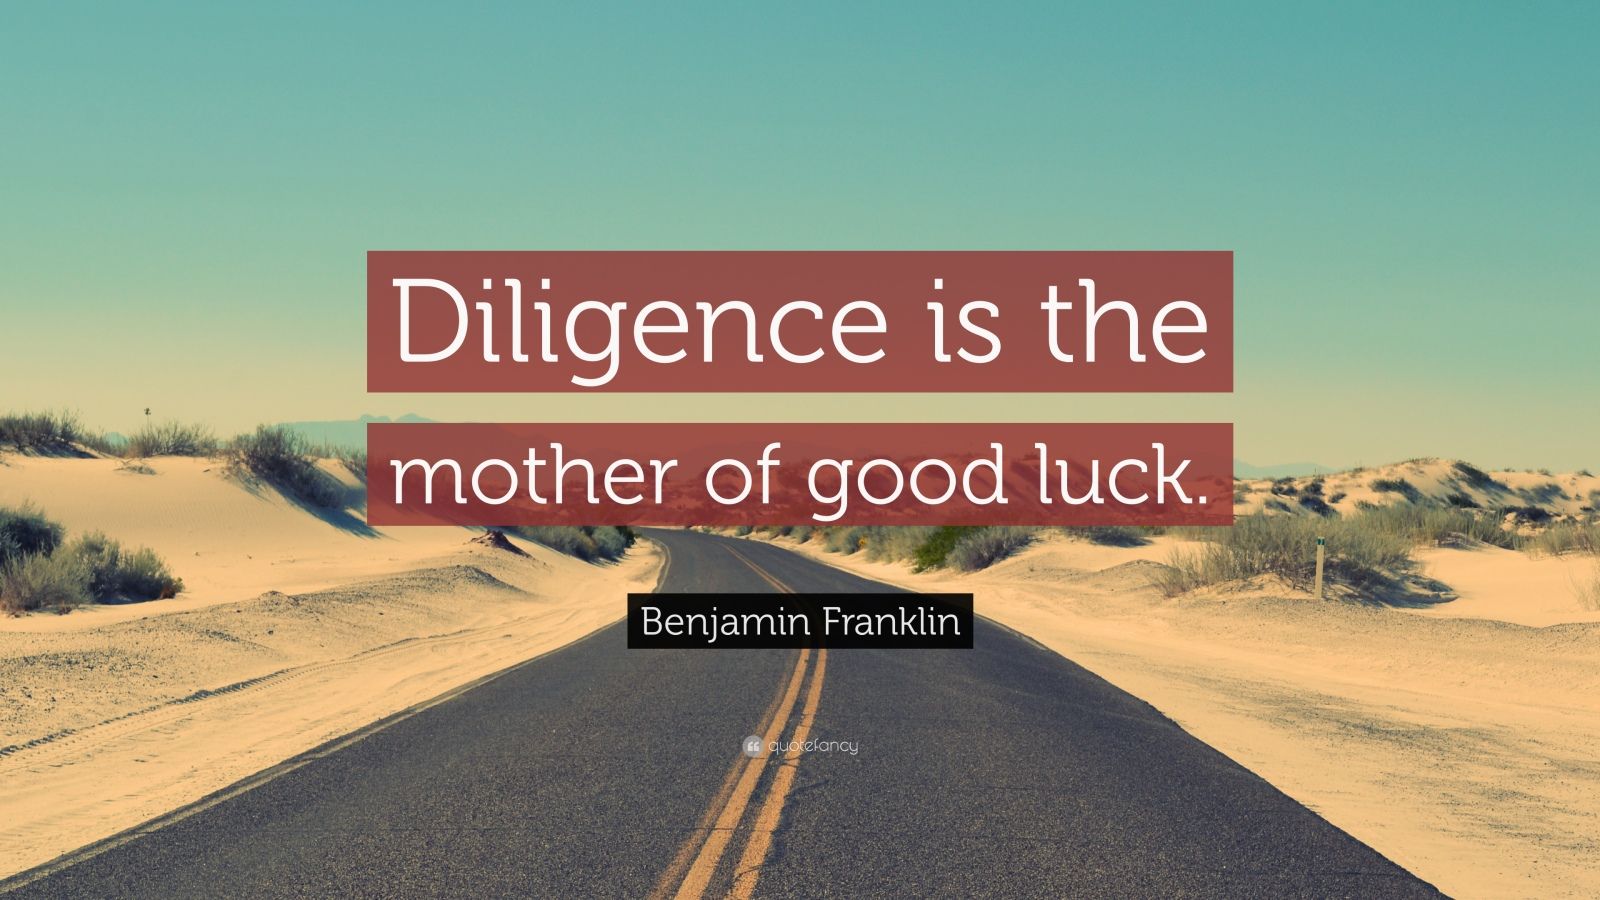 Benjamin Franklin Quote: “Diligence is the mother of good luck.” (25